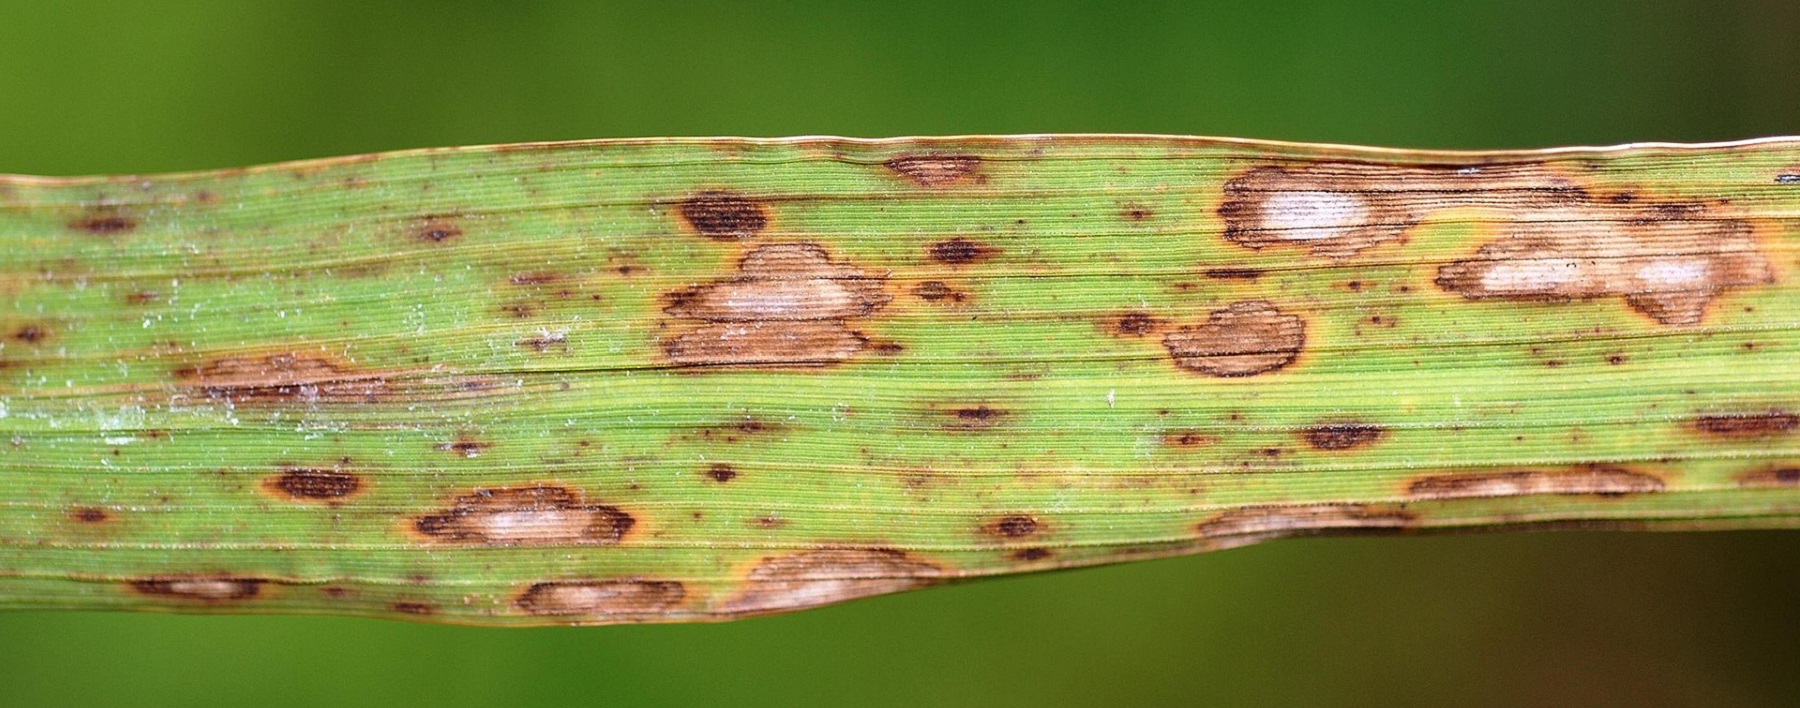 Plant showing signs of disease, brown and white spots visible